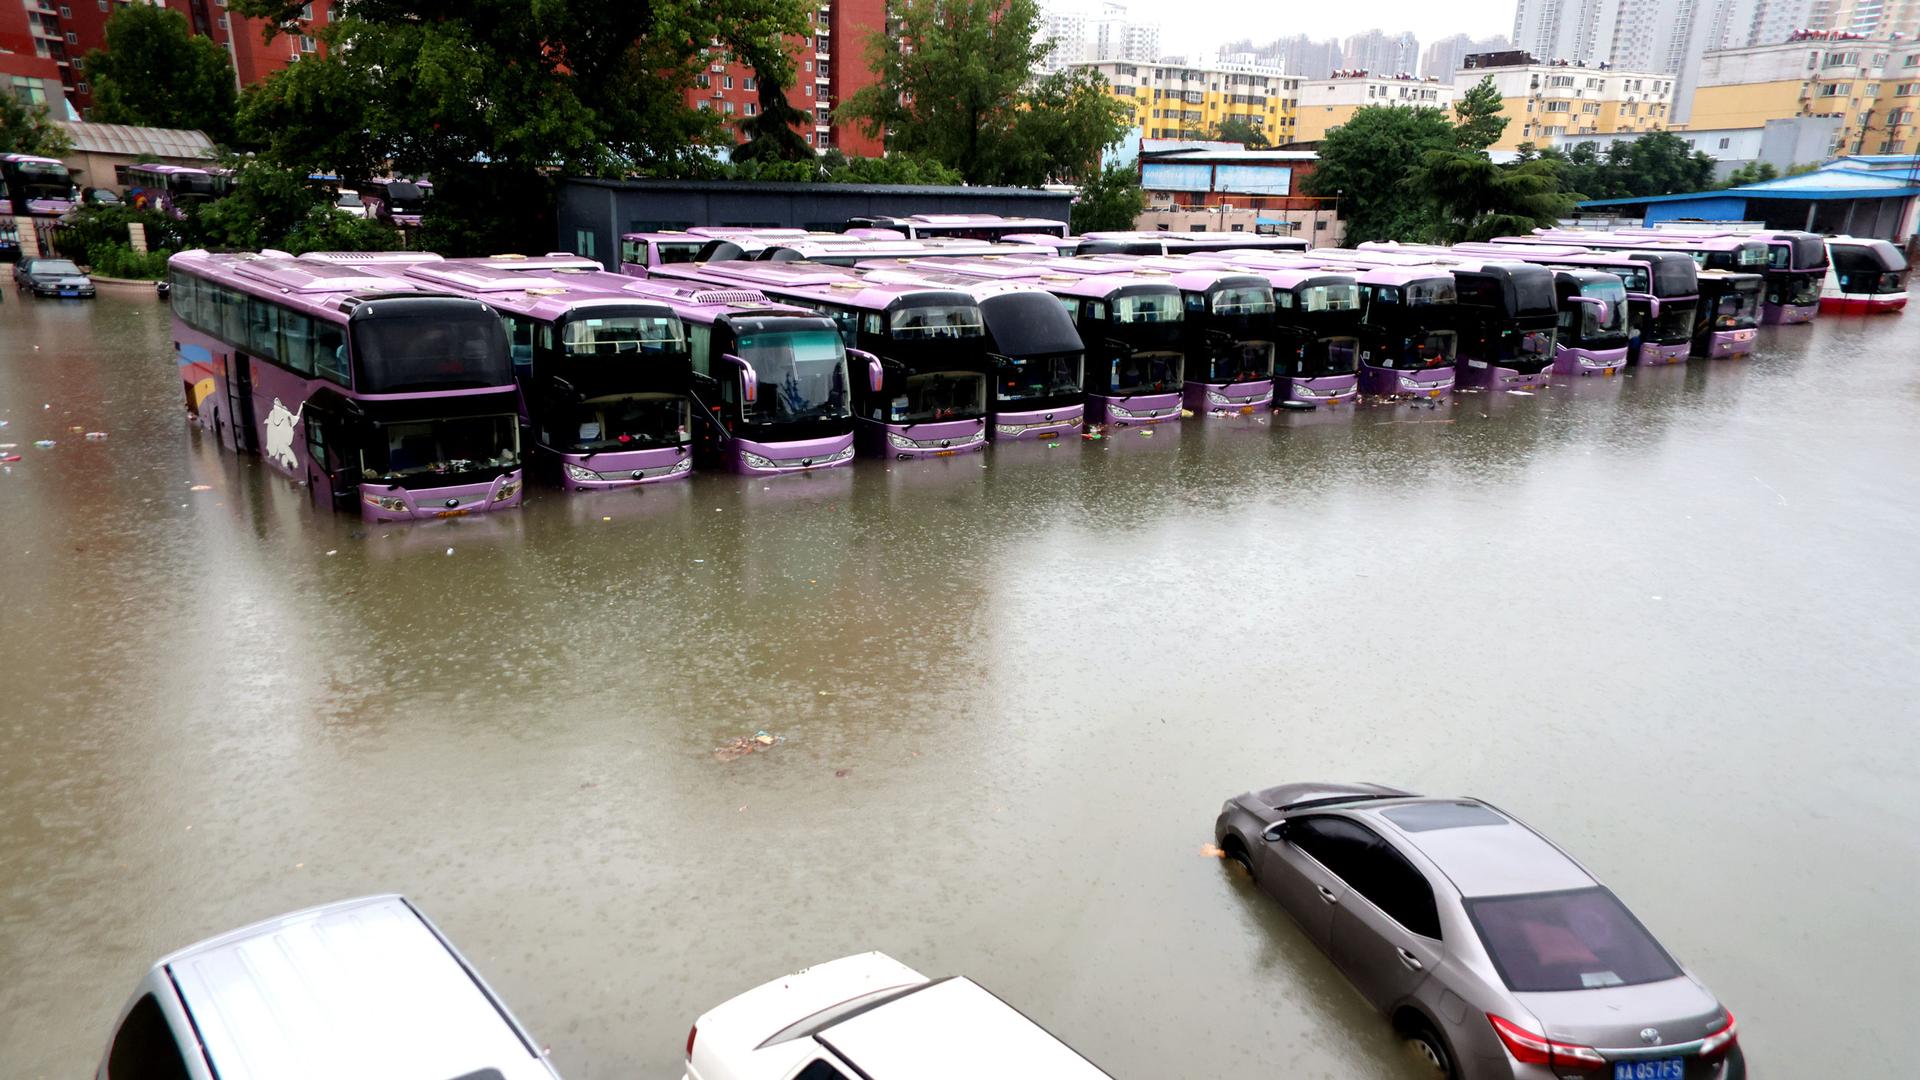 A row of more than a dozen purple buses are shown partially submerged by flood water.